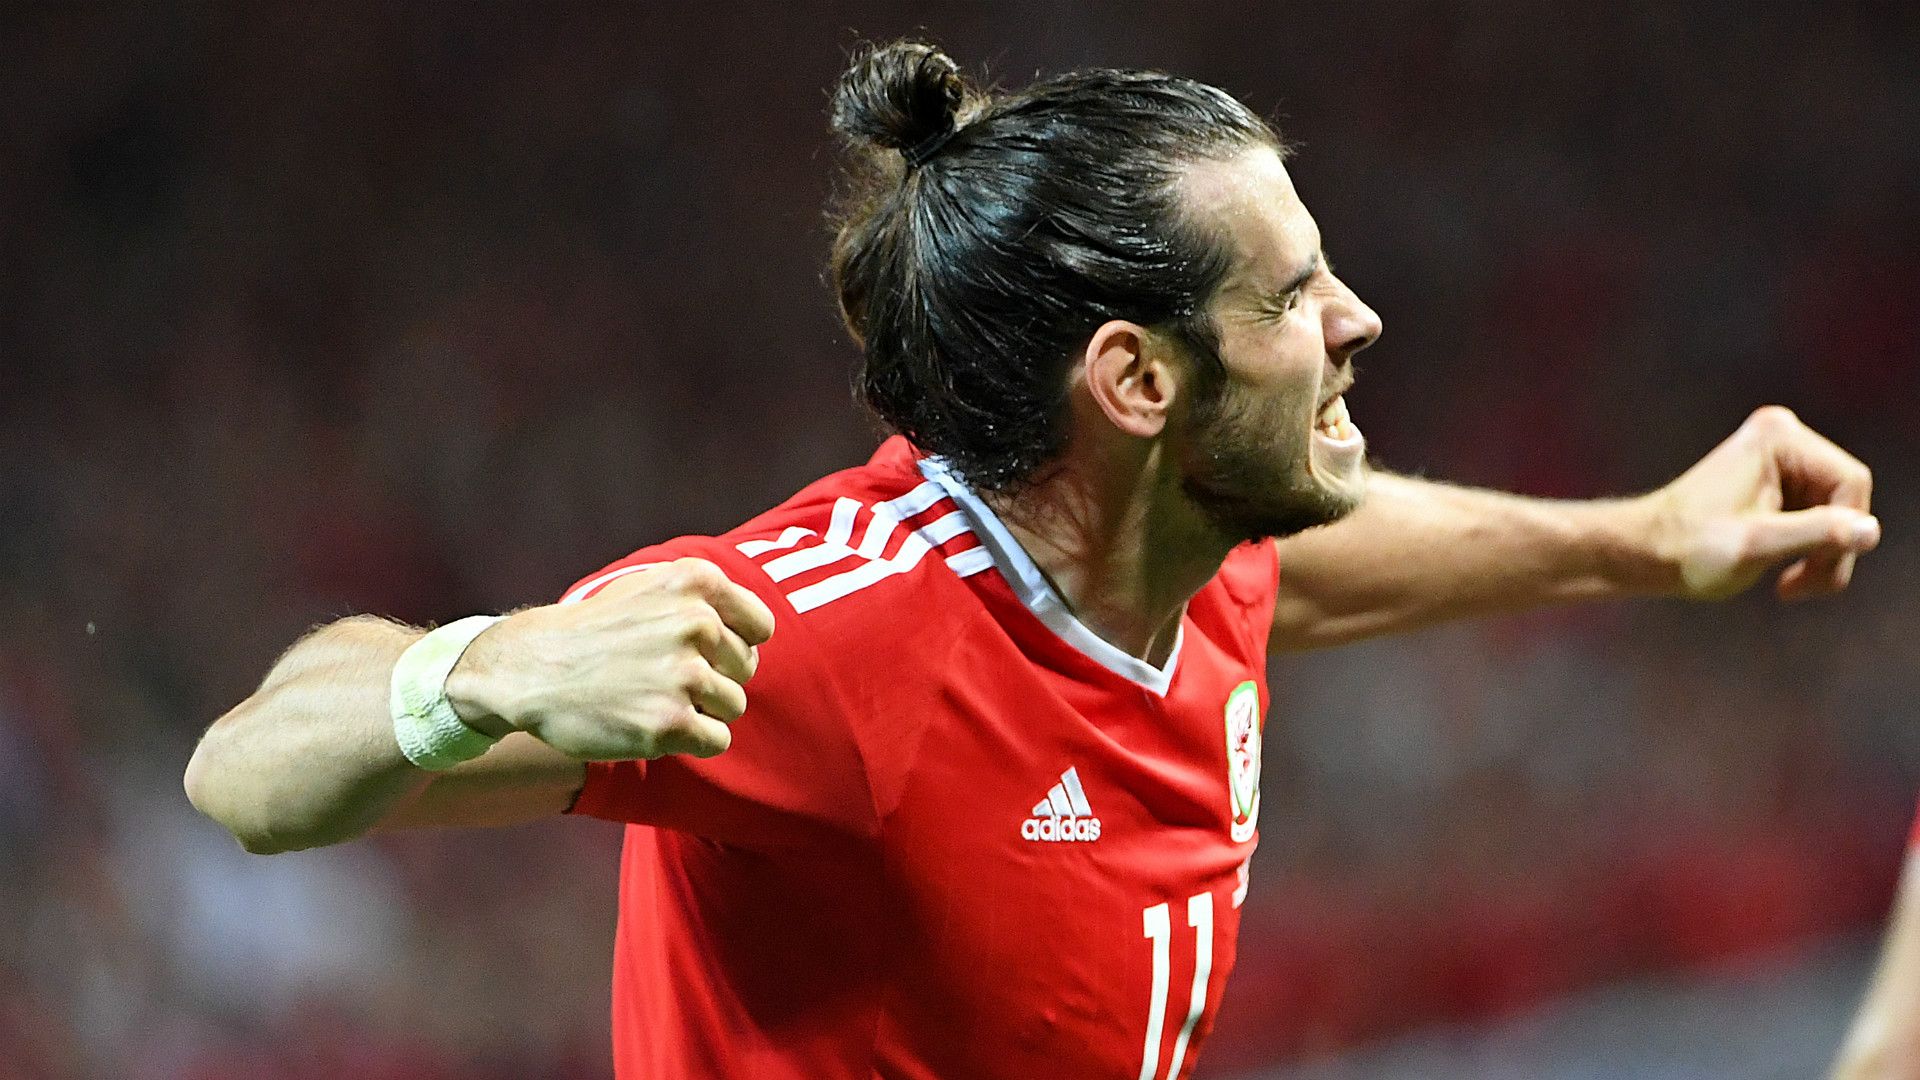 Gareth Bale breaks 58-year-old record at Euro 2016